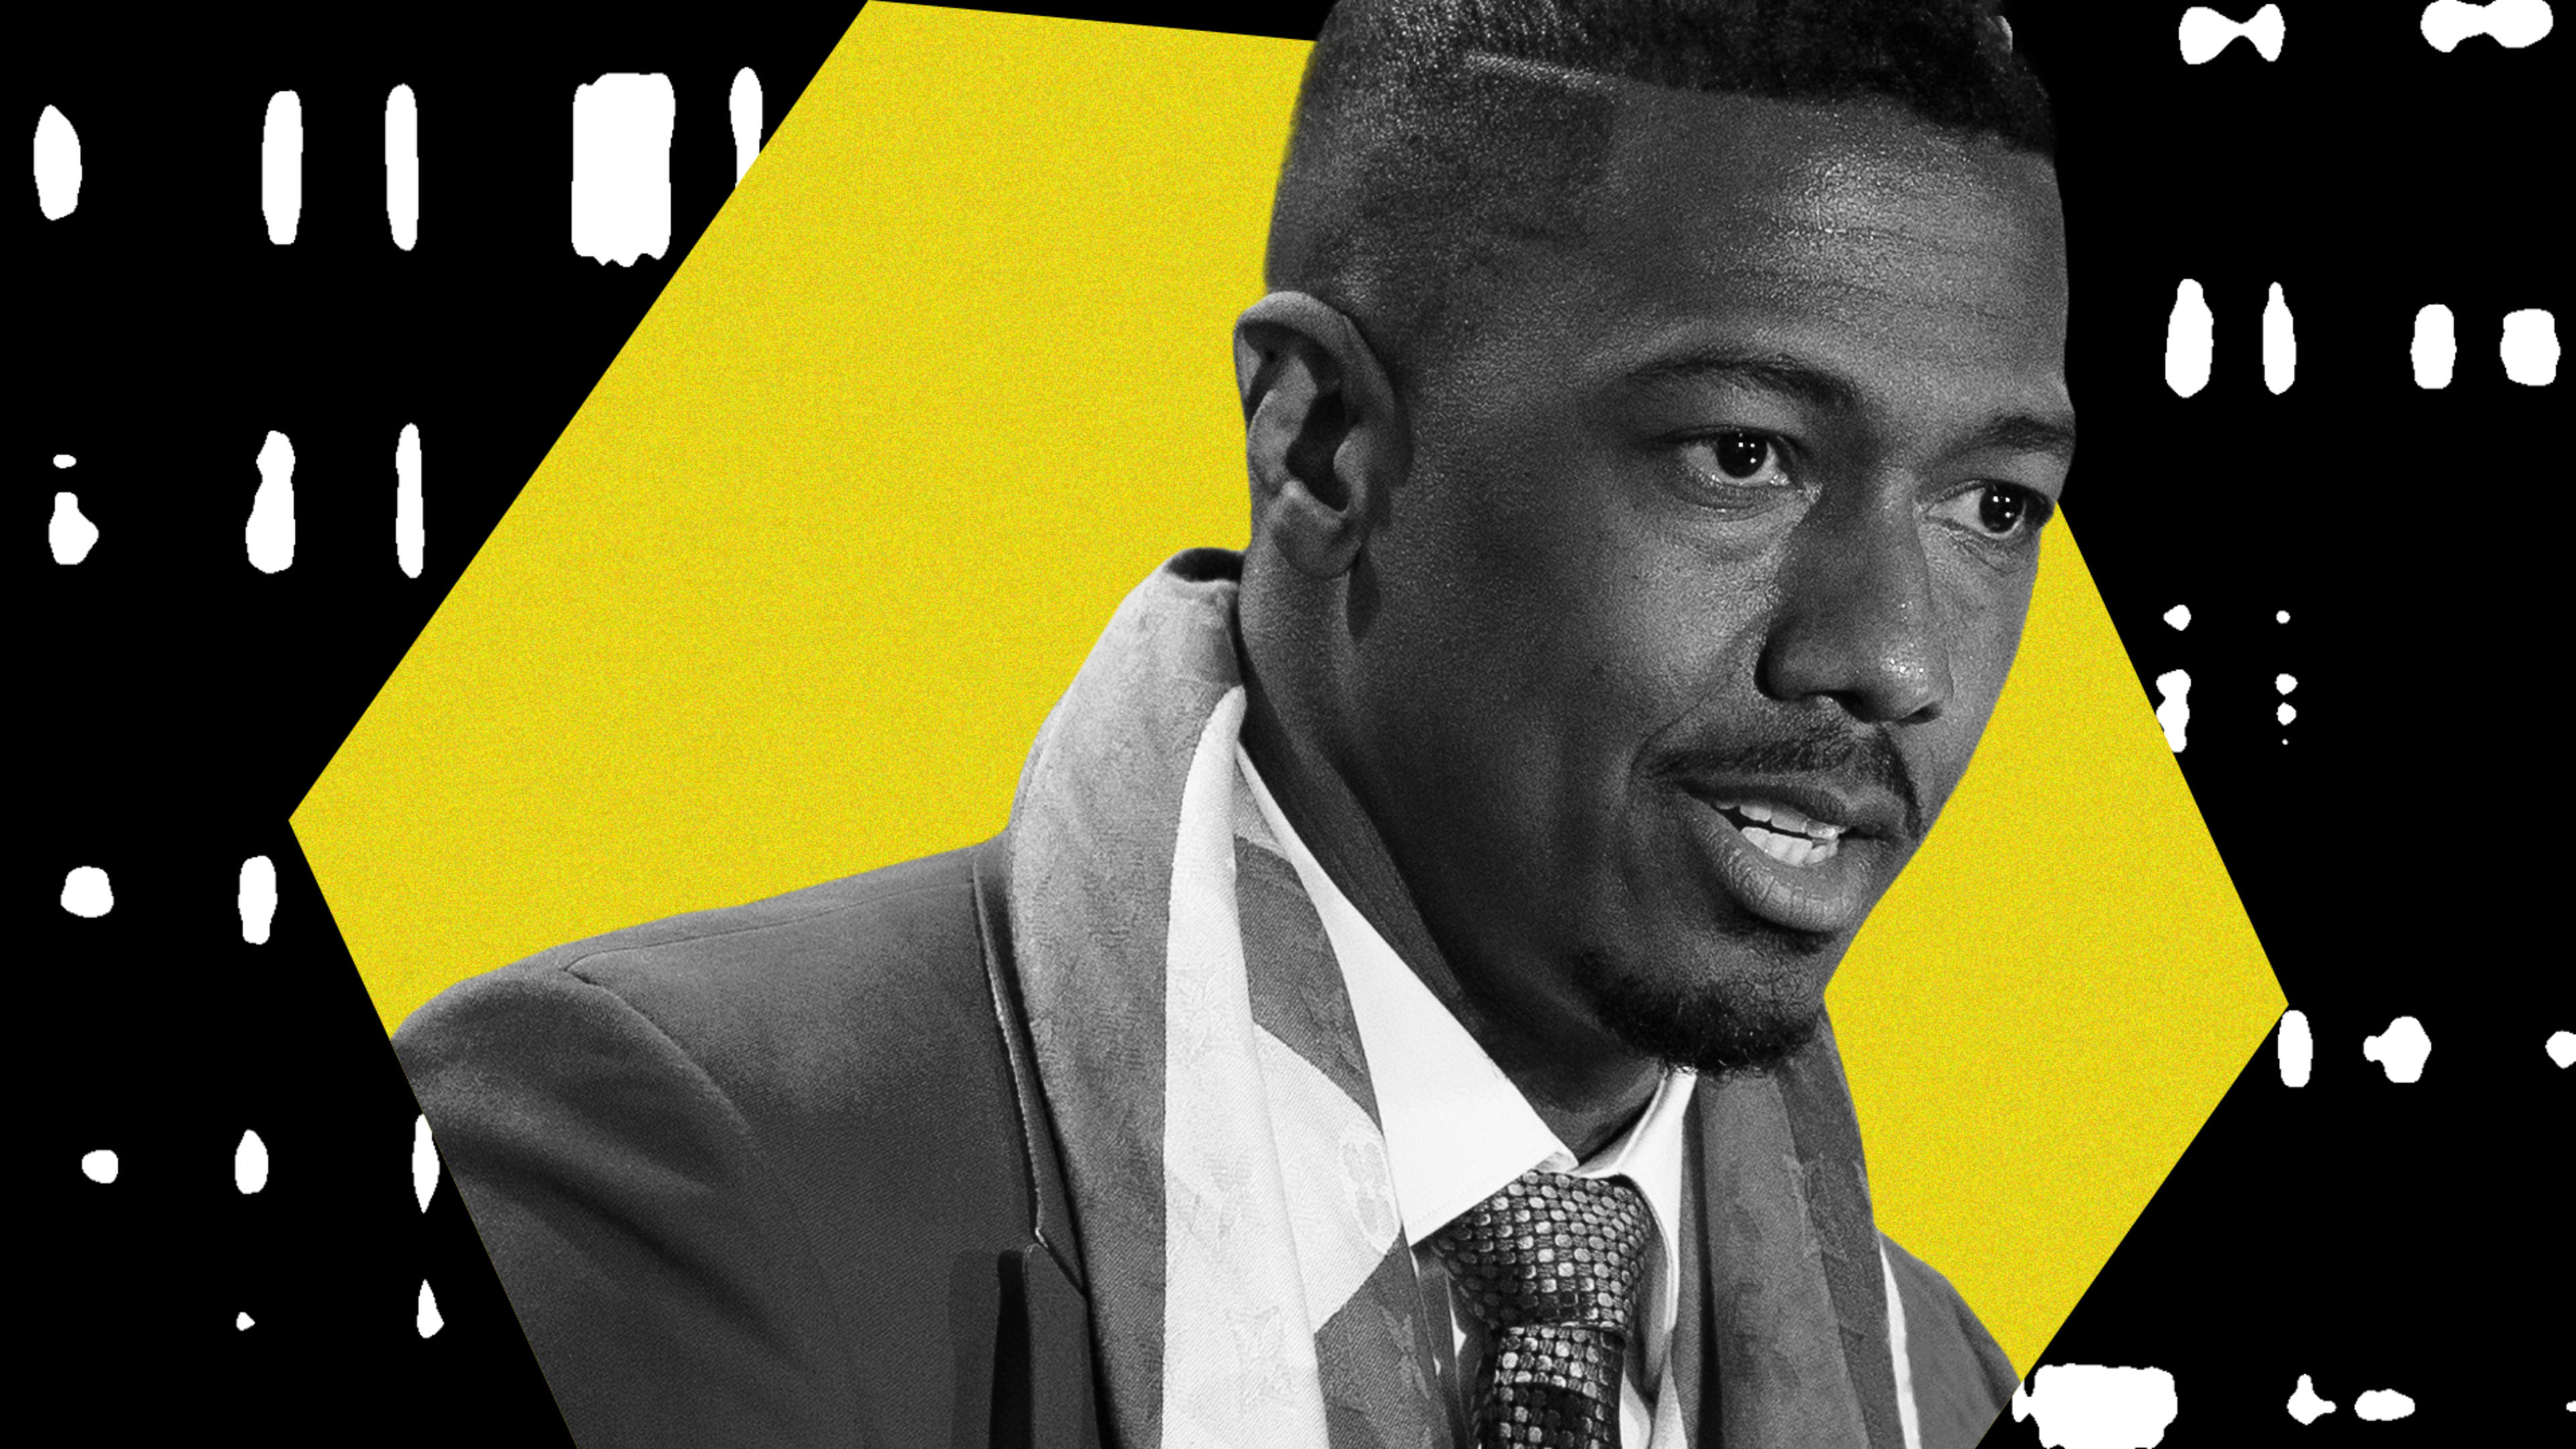 Nick Cannon speaks out on his controversial interview: ‘I want to be corrected’